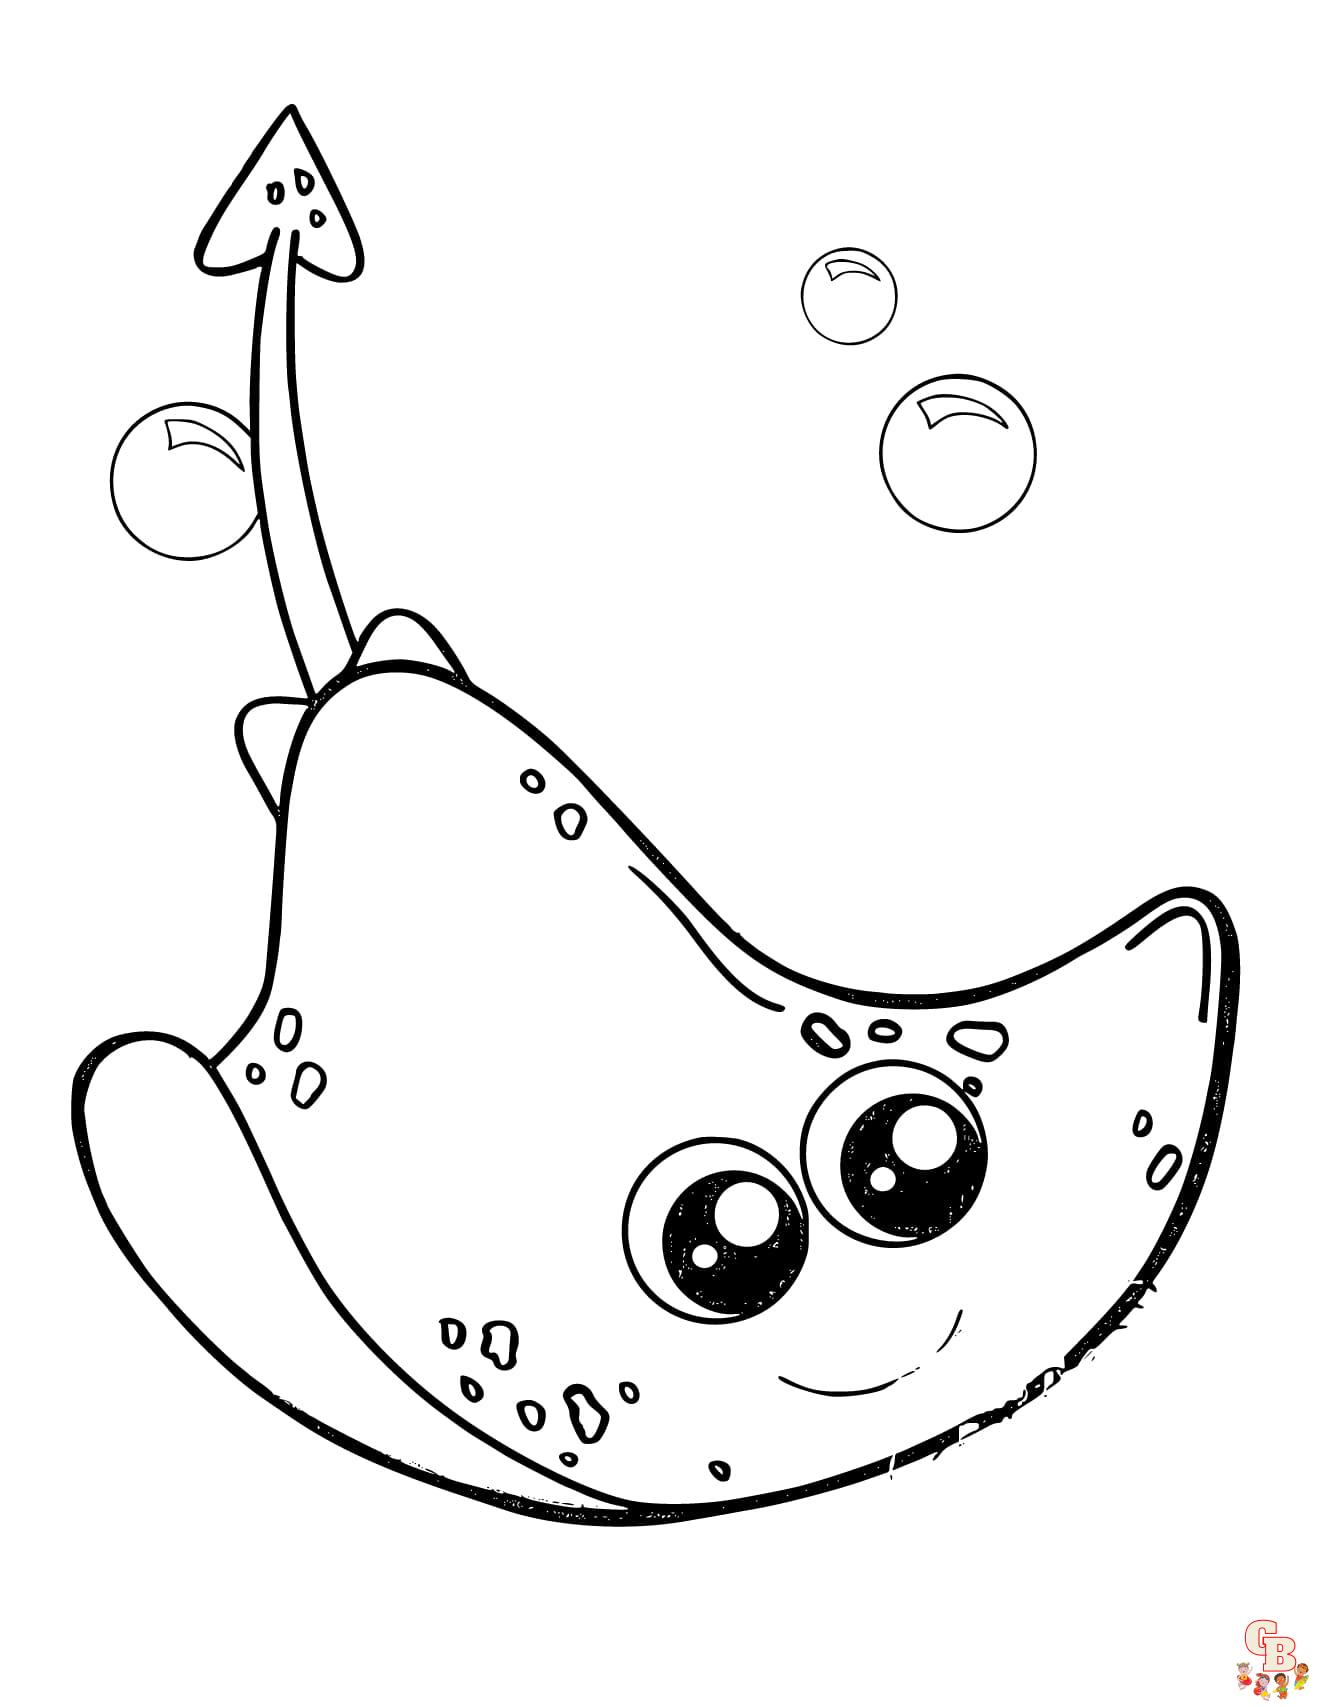 Stingrays Coloring Pages